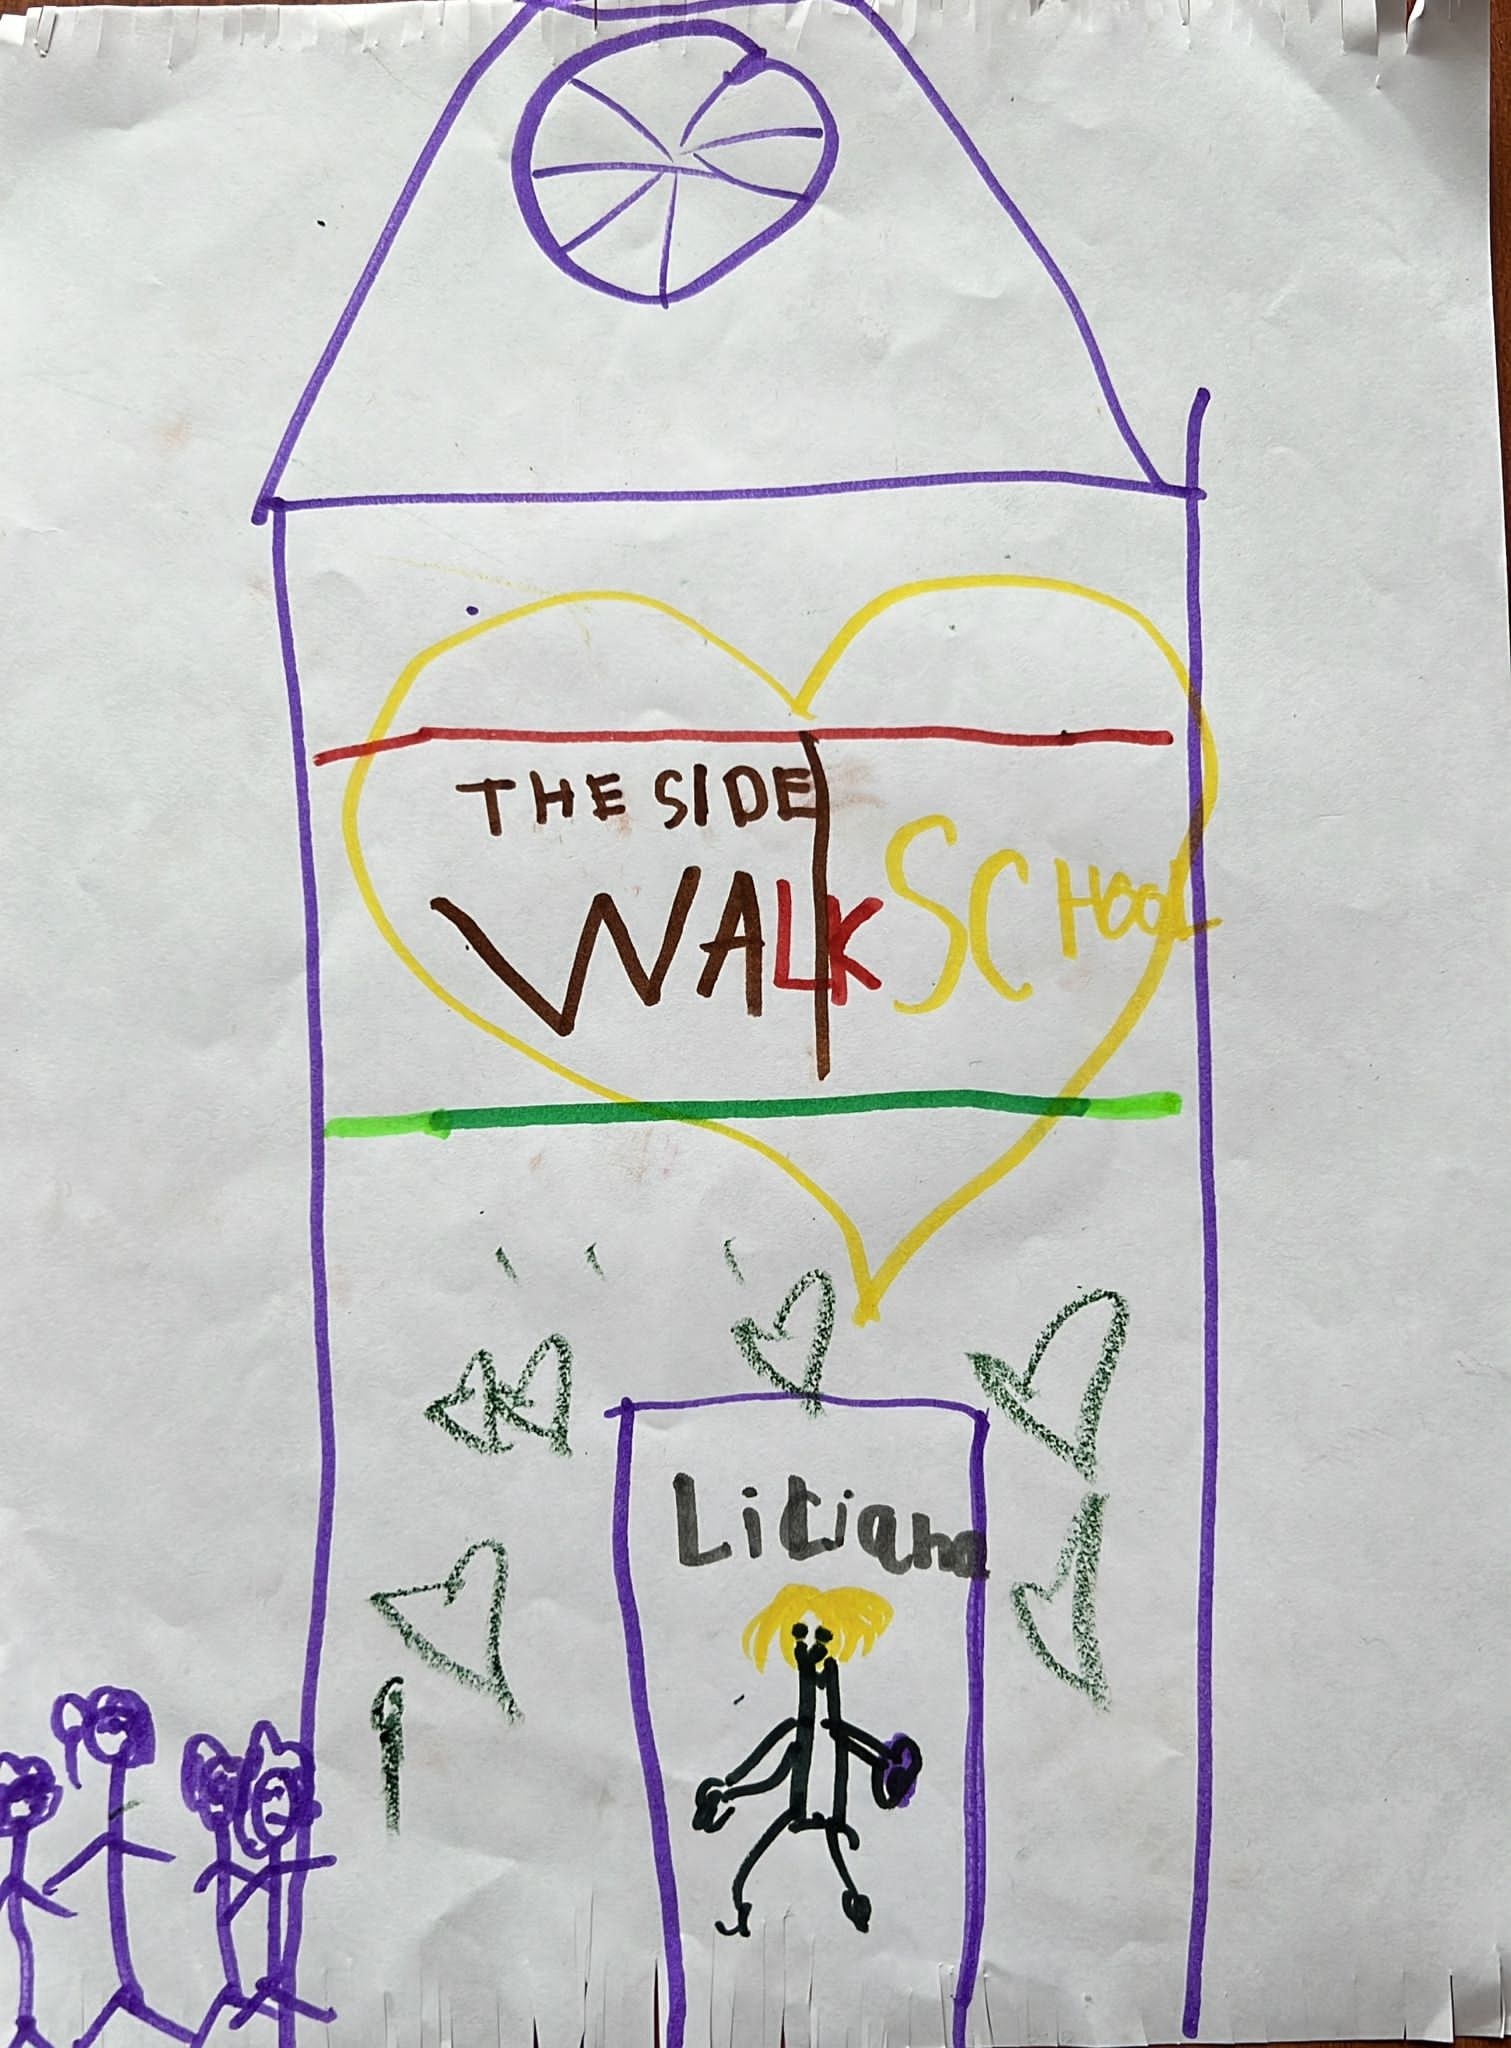 A child&#x27;s drawing that reads &quot;The Sidewalk School&quot;